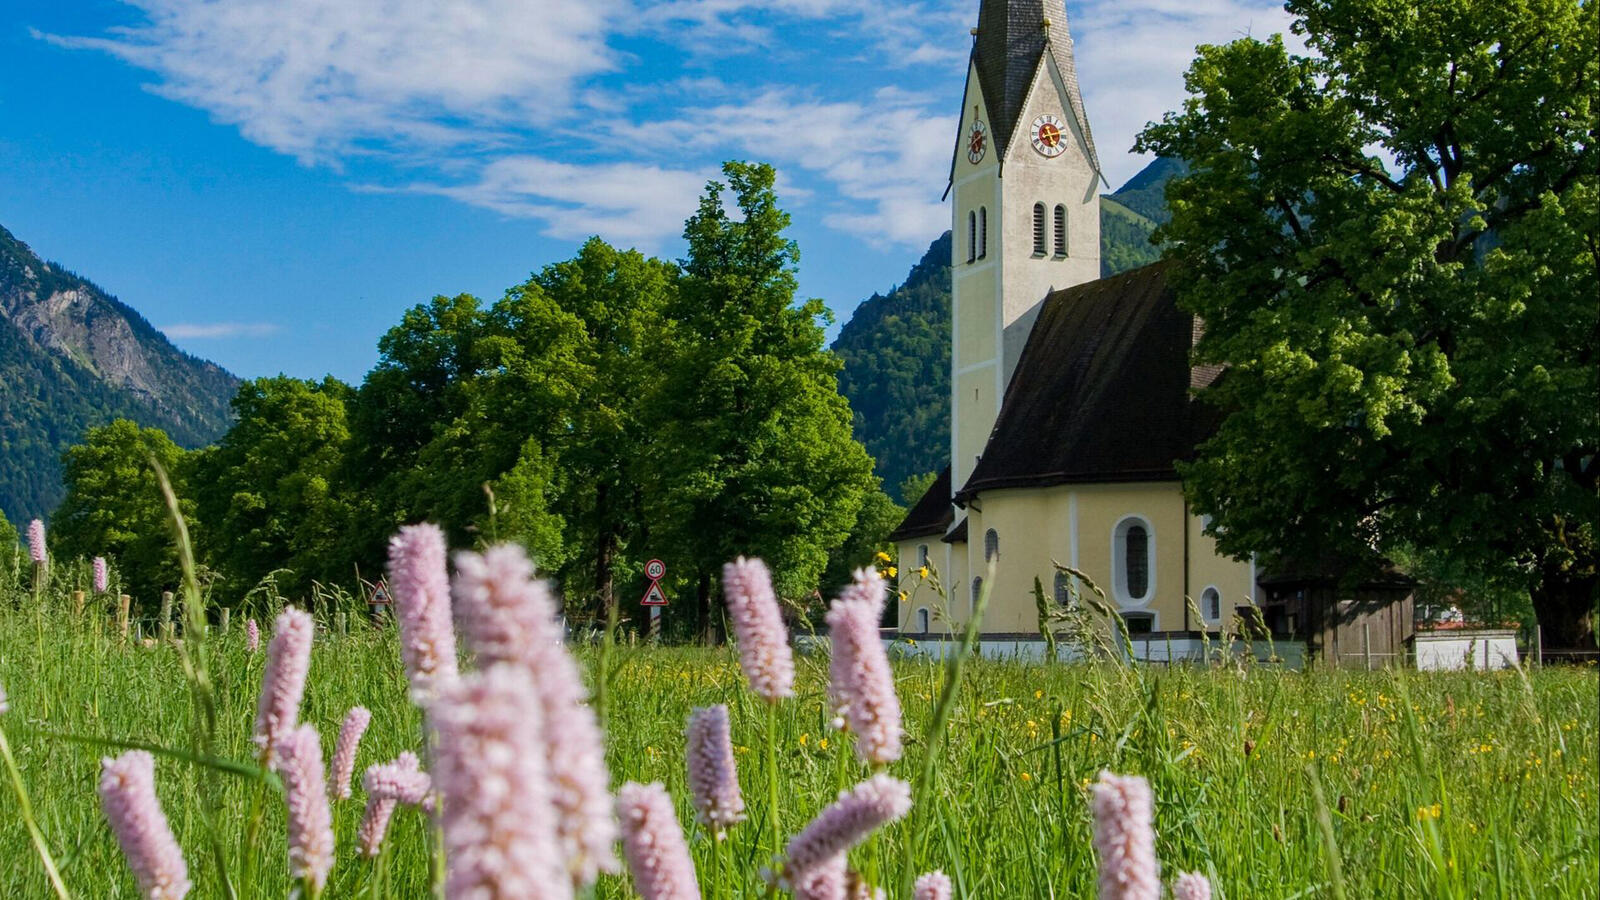 Free photo A church building located near a green forest with mountains